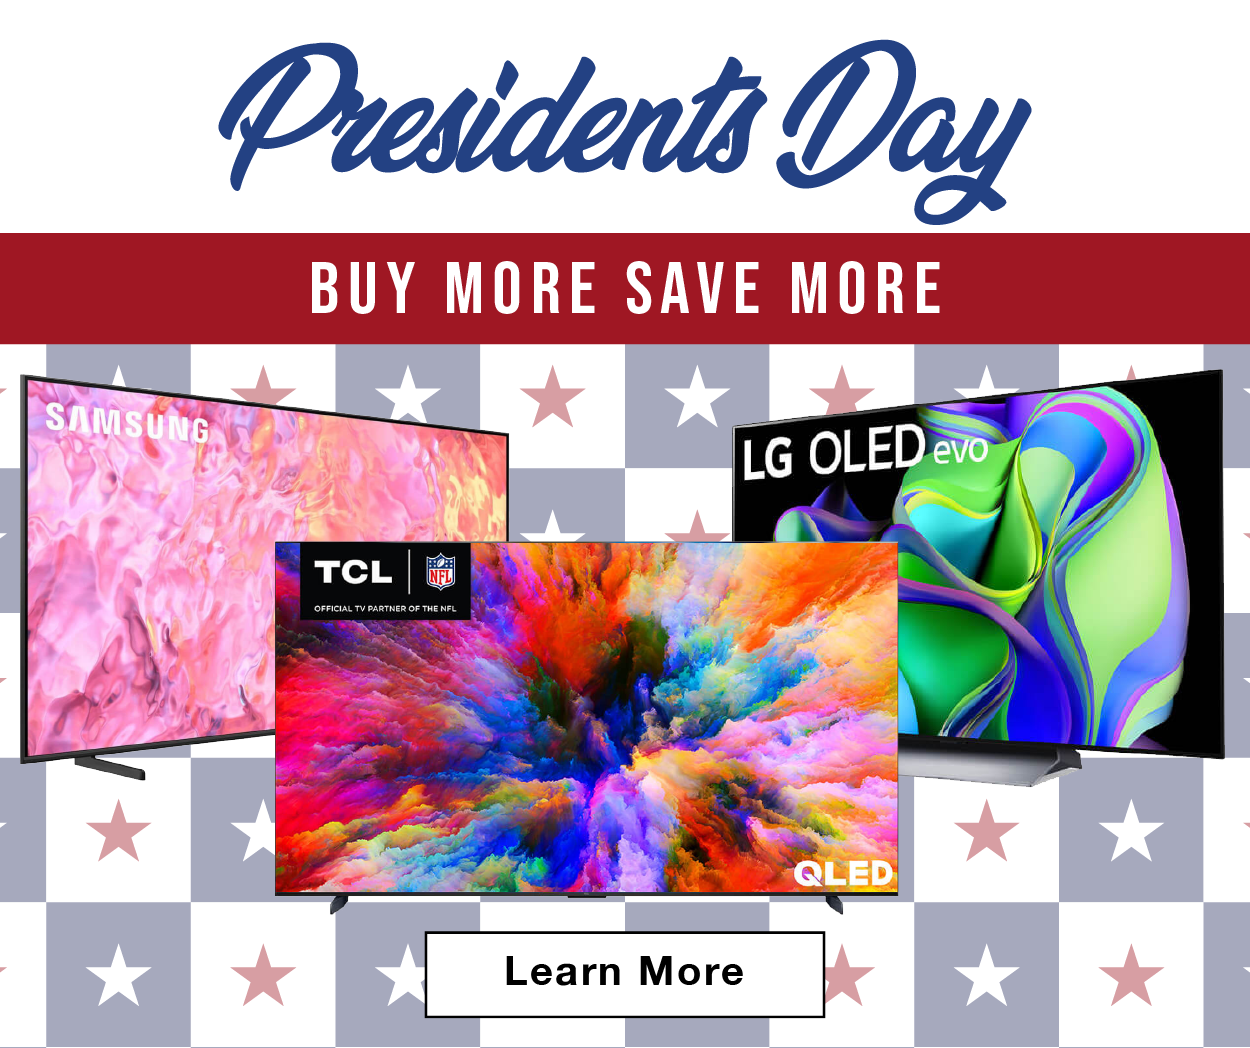 Presidents' Day, buy more save more.